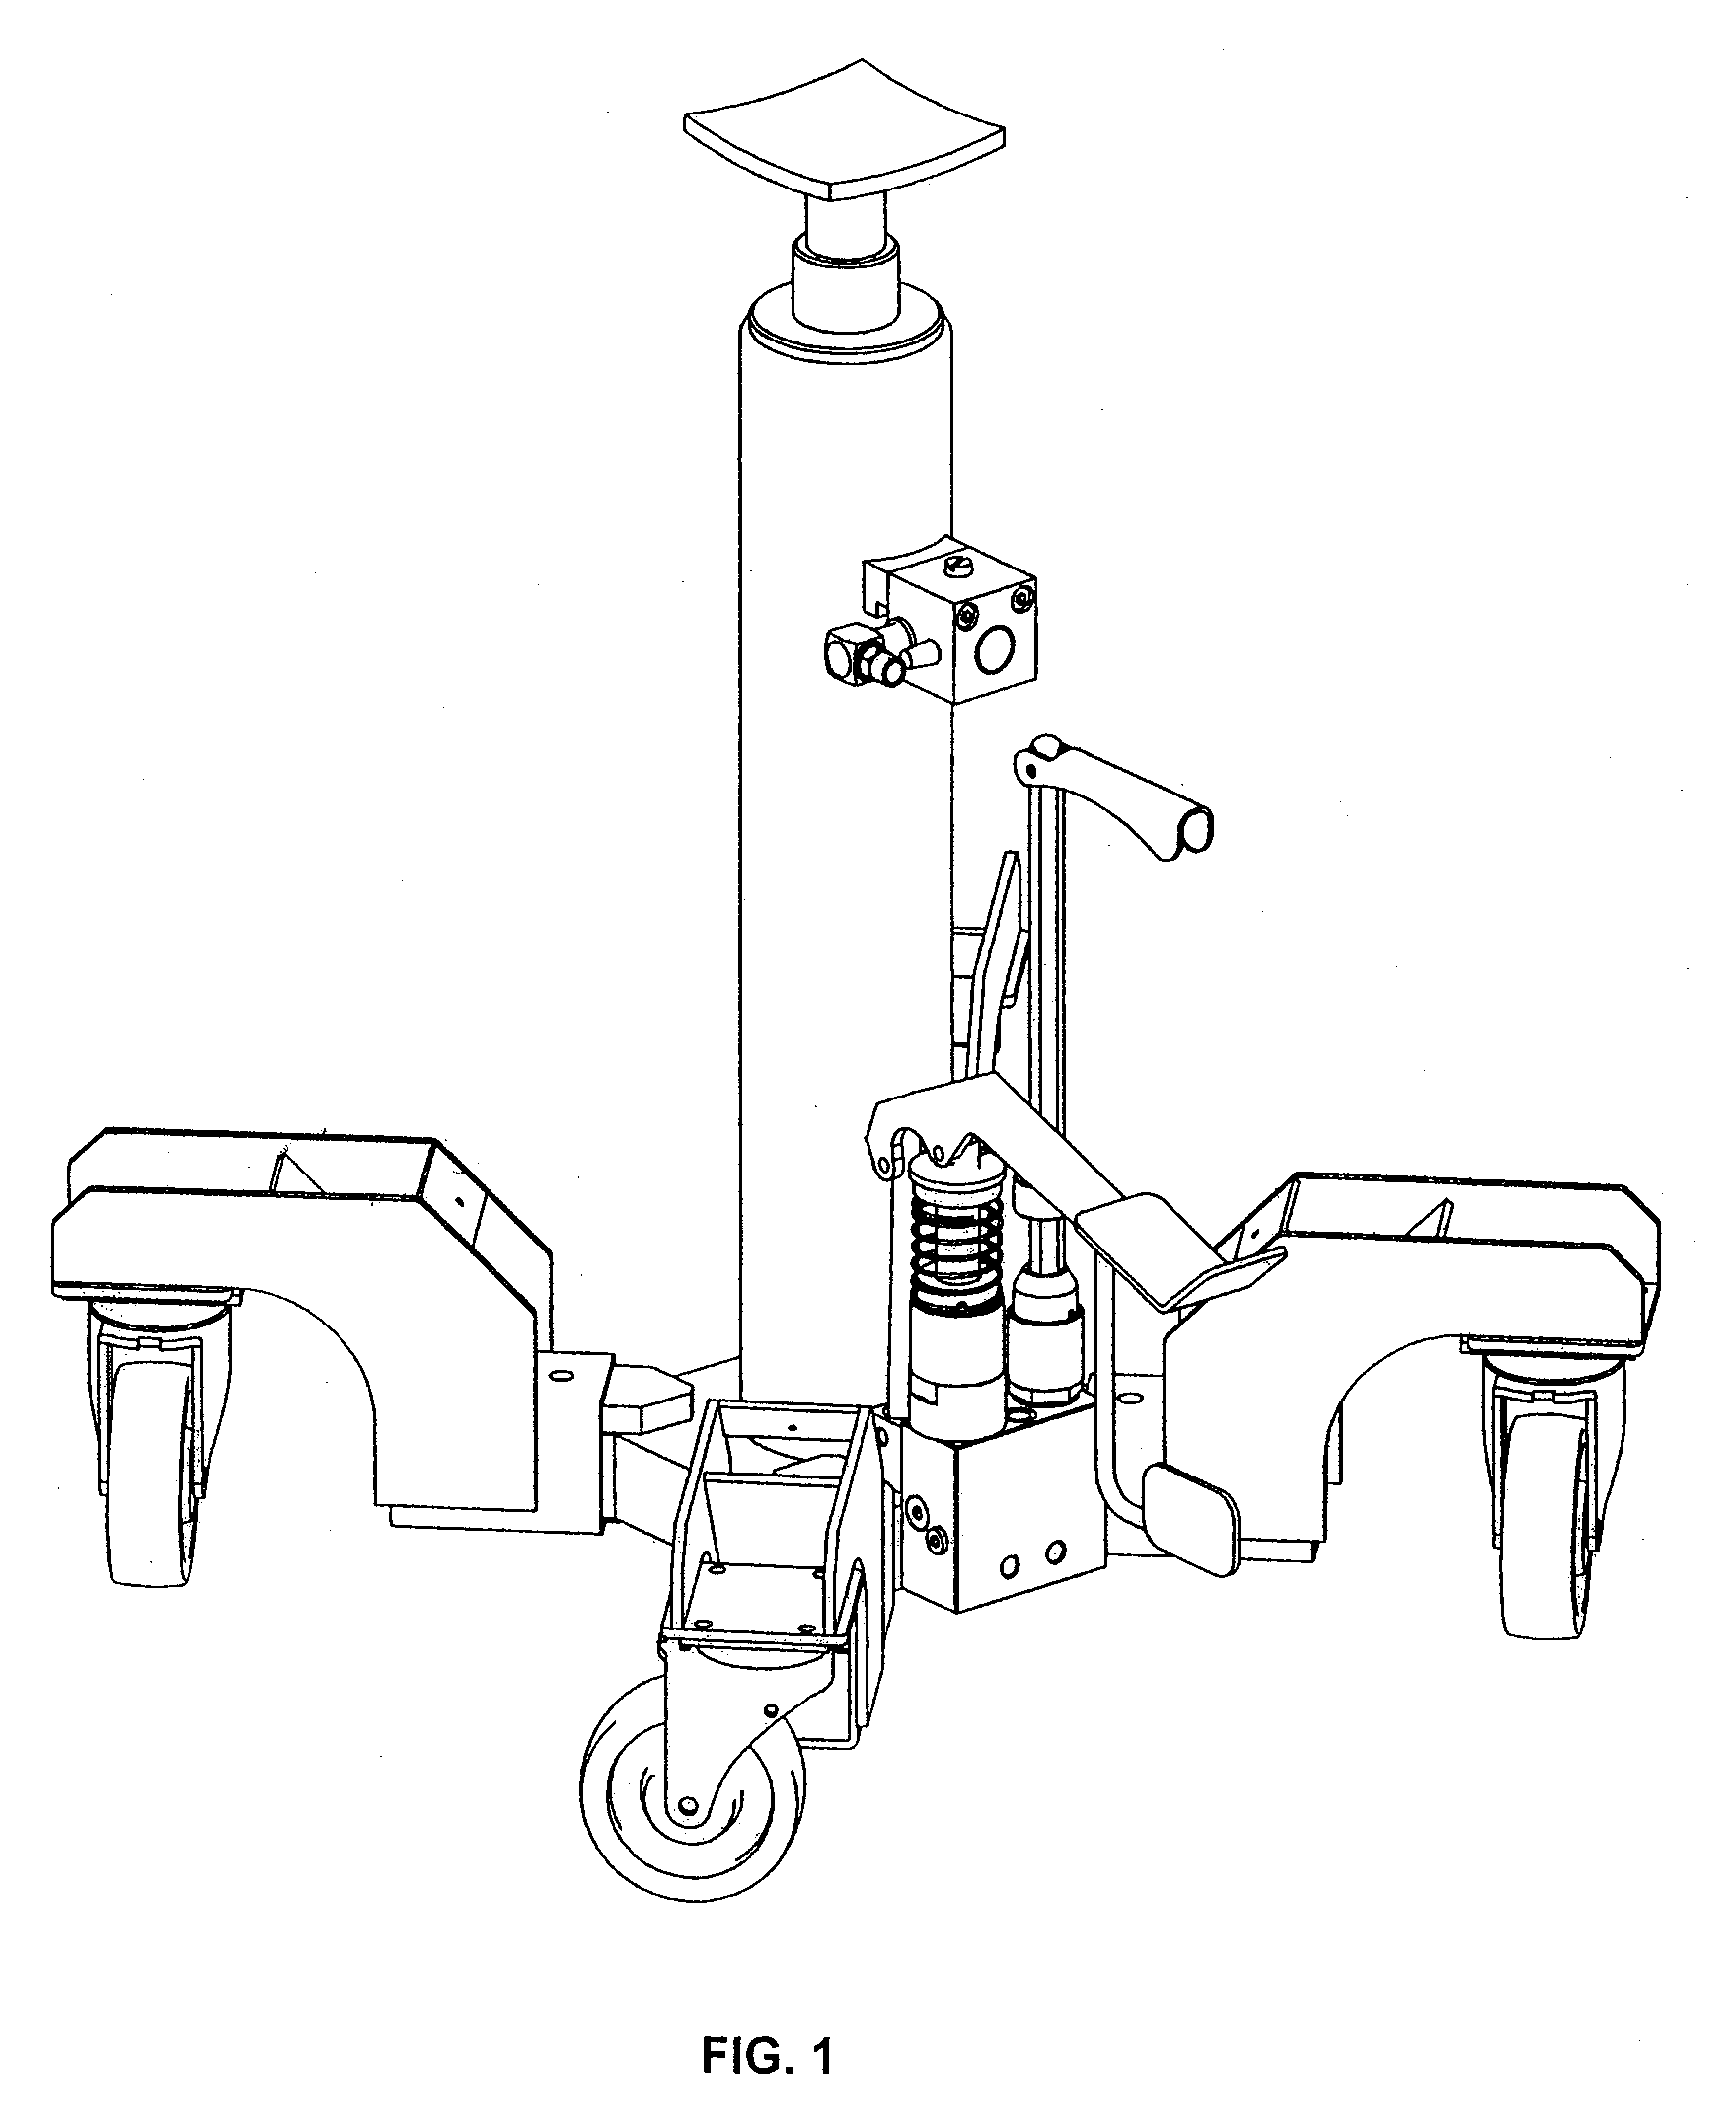 One kind of foot pedal hydraulic jack with two speed pump, and there is a pneumatic set to lift piston quickly on the jack